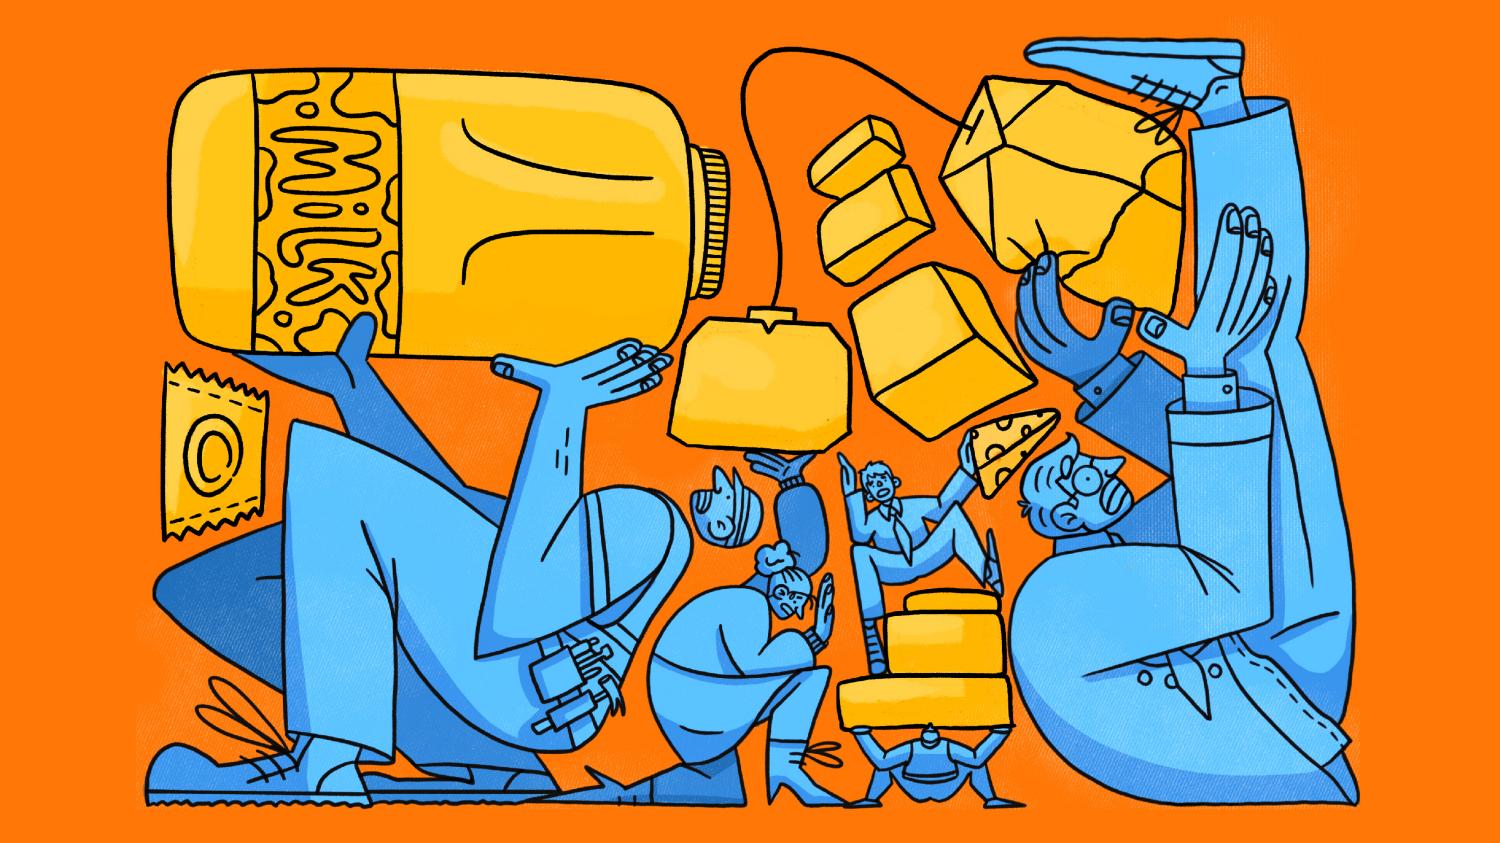 Blue figures holding up various objects against an orange background.